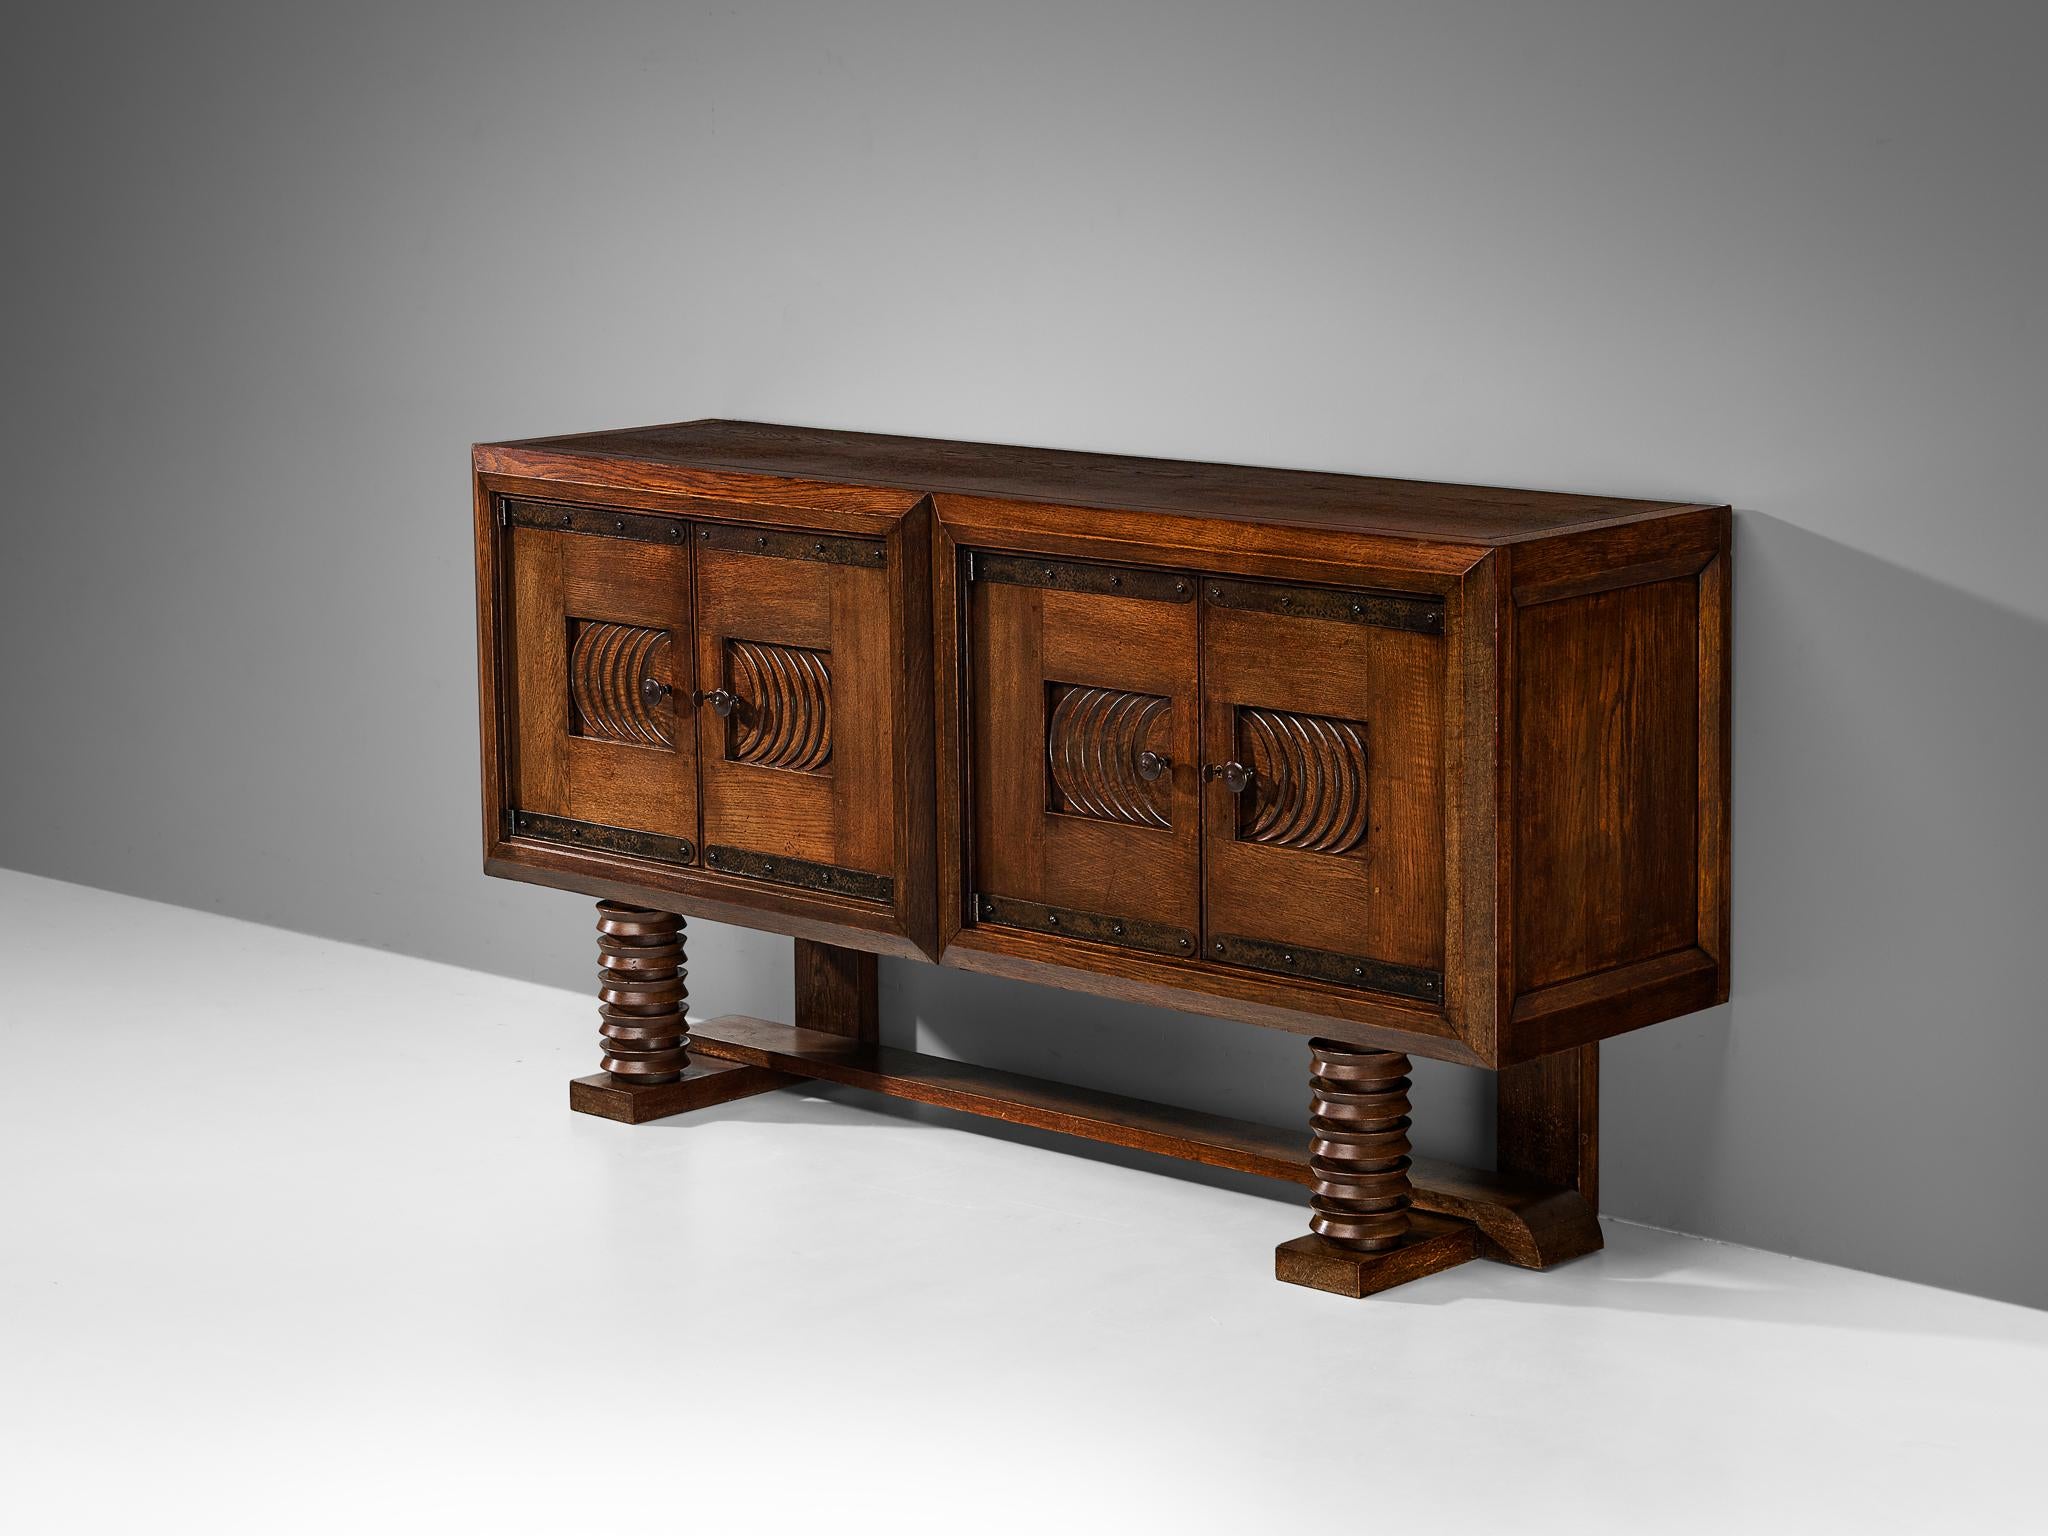 Parisian Art Deco Sideboard in Solid Oak with Iron Elements